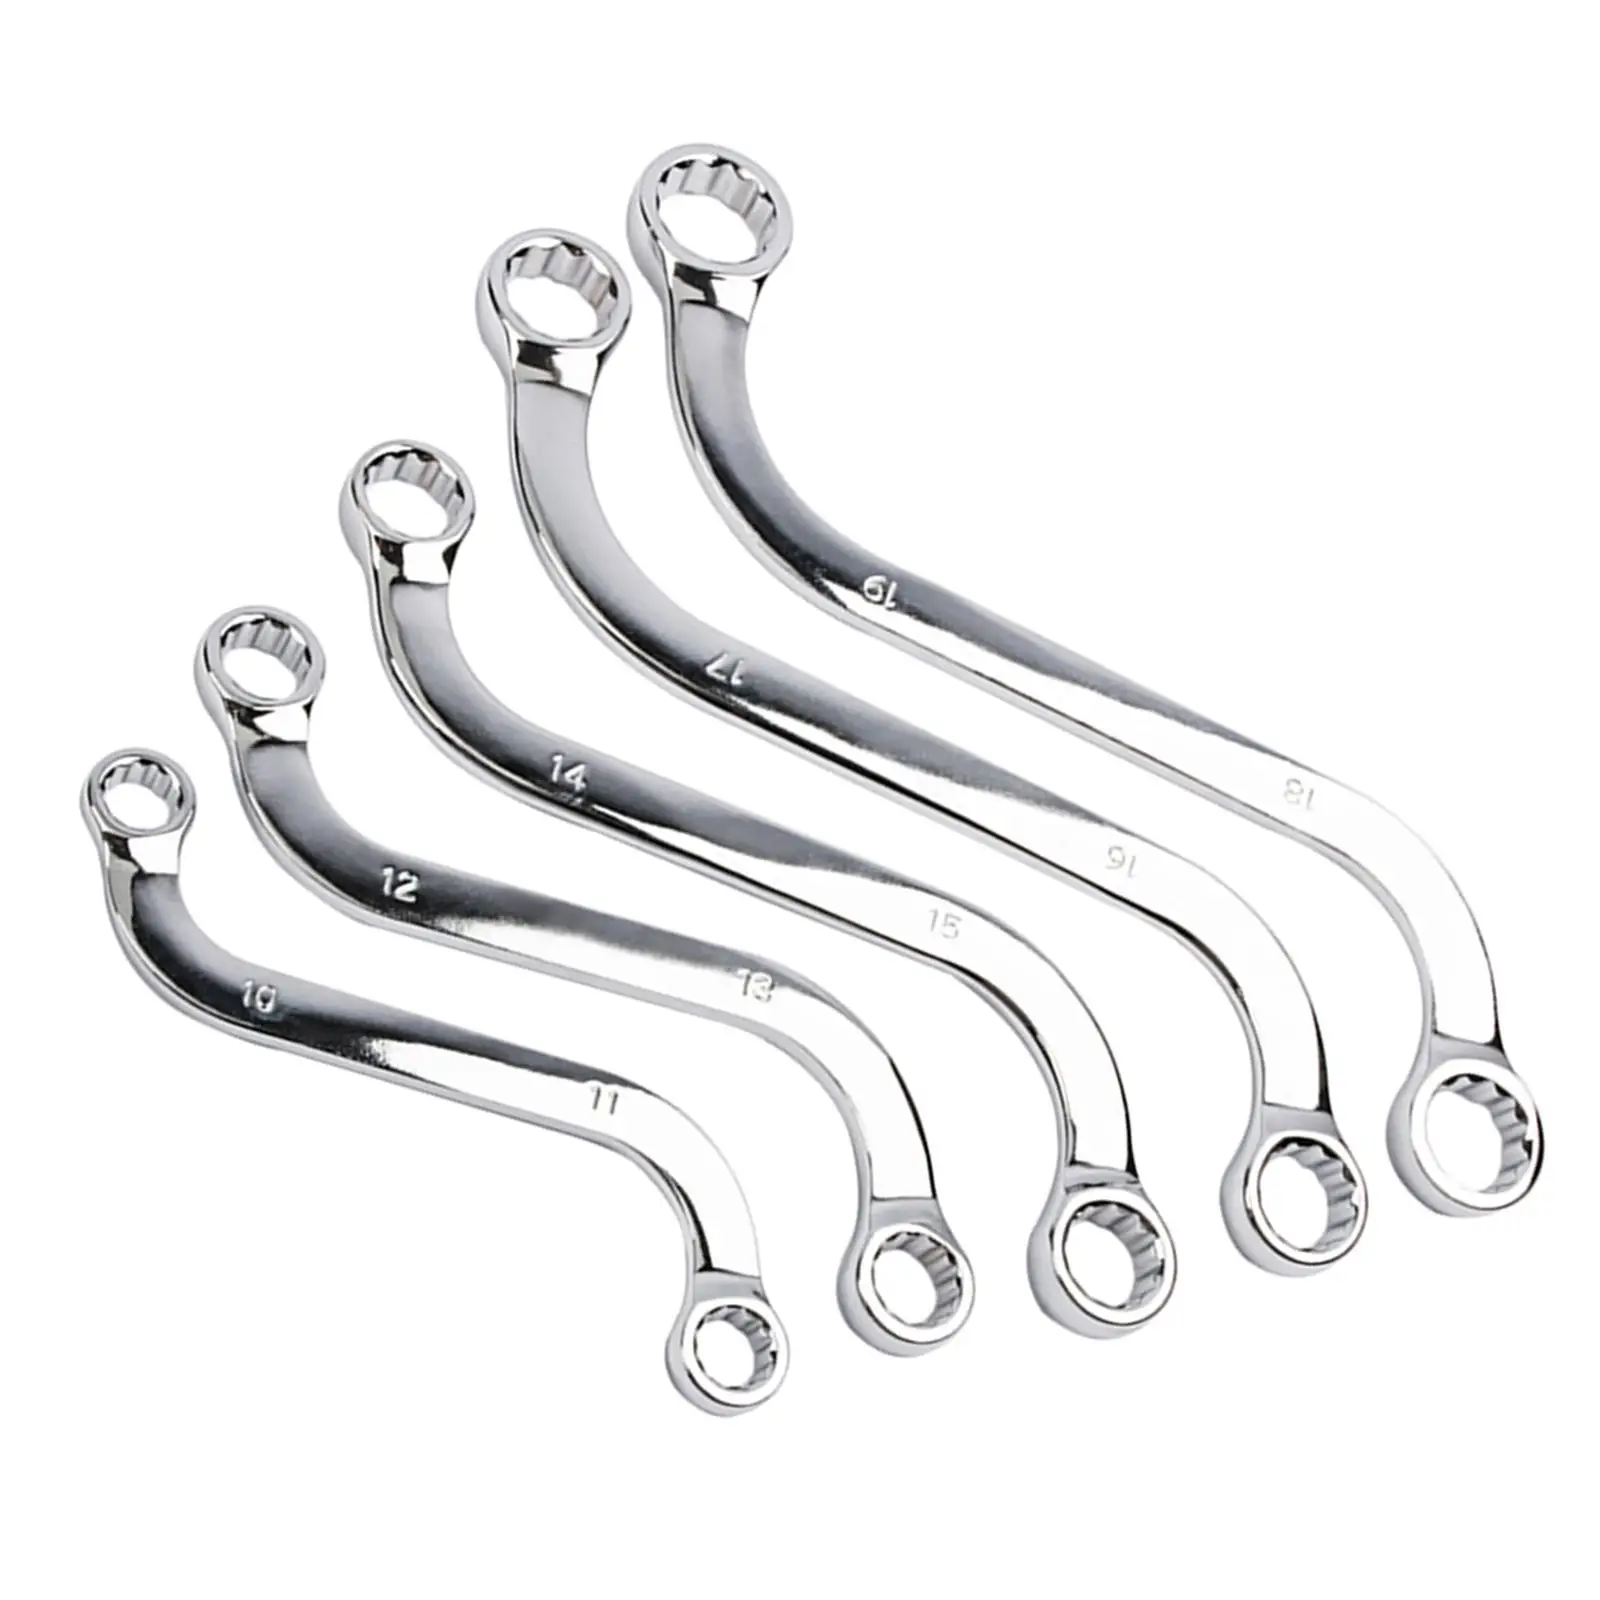 5Pcs Universal S Type Wrench Set Combination Set for Outdoor Auto houses tools Accessories